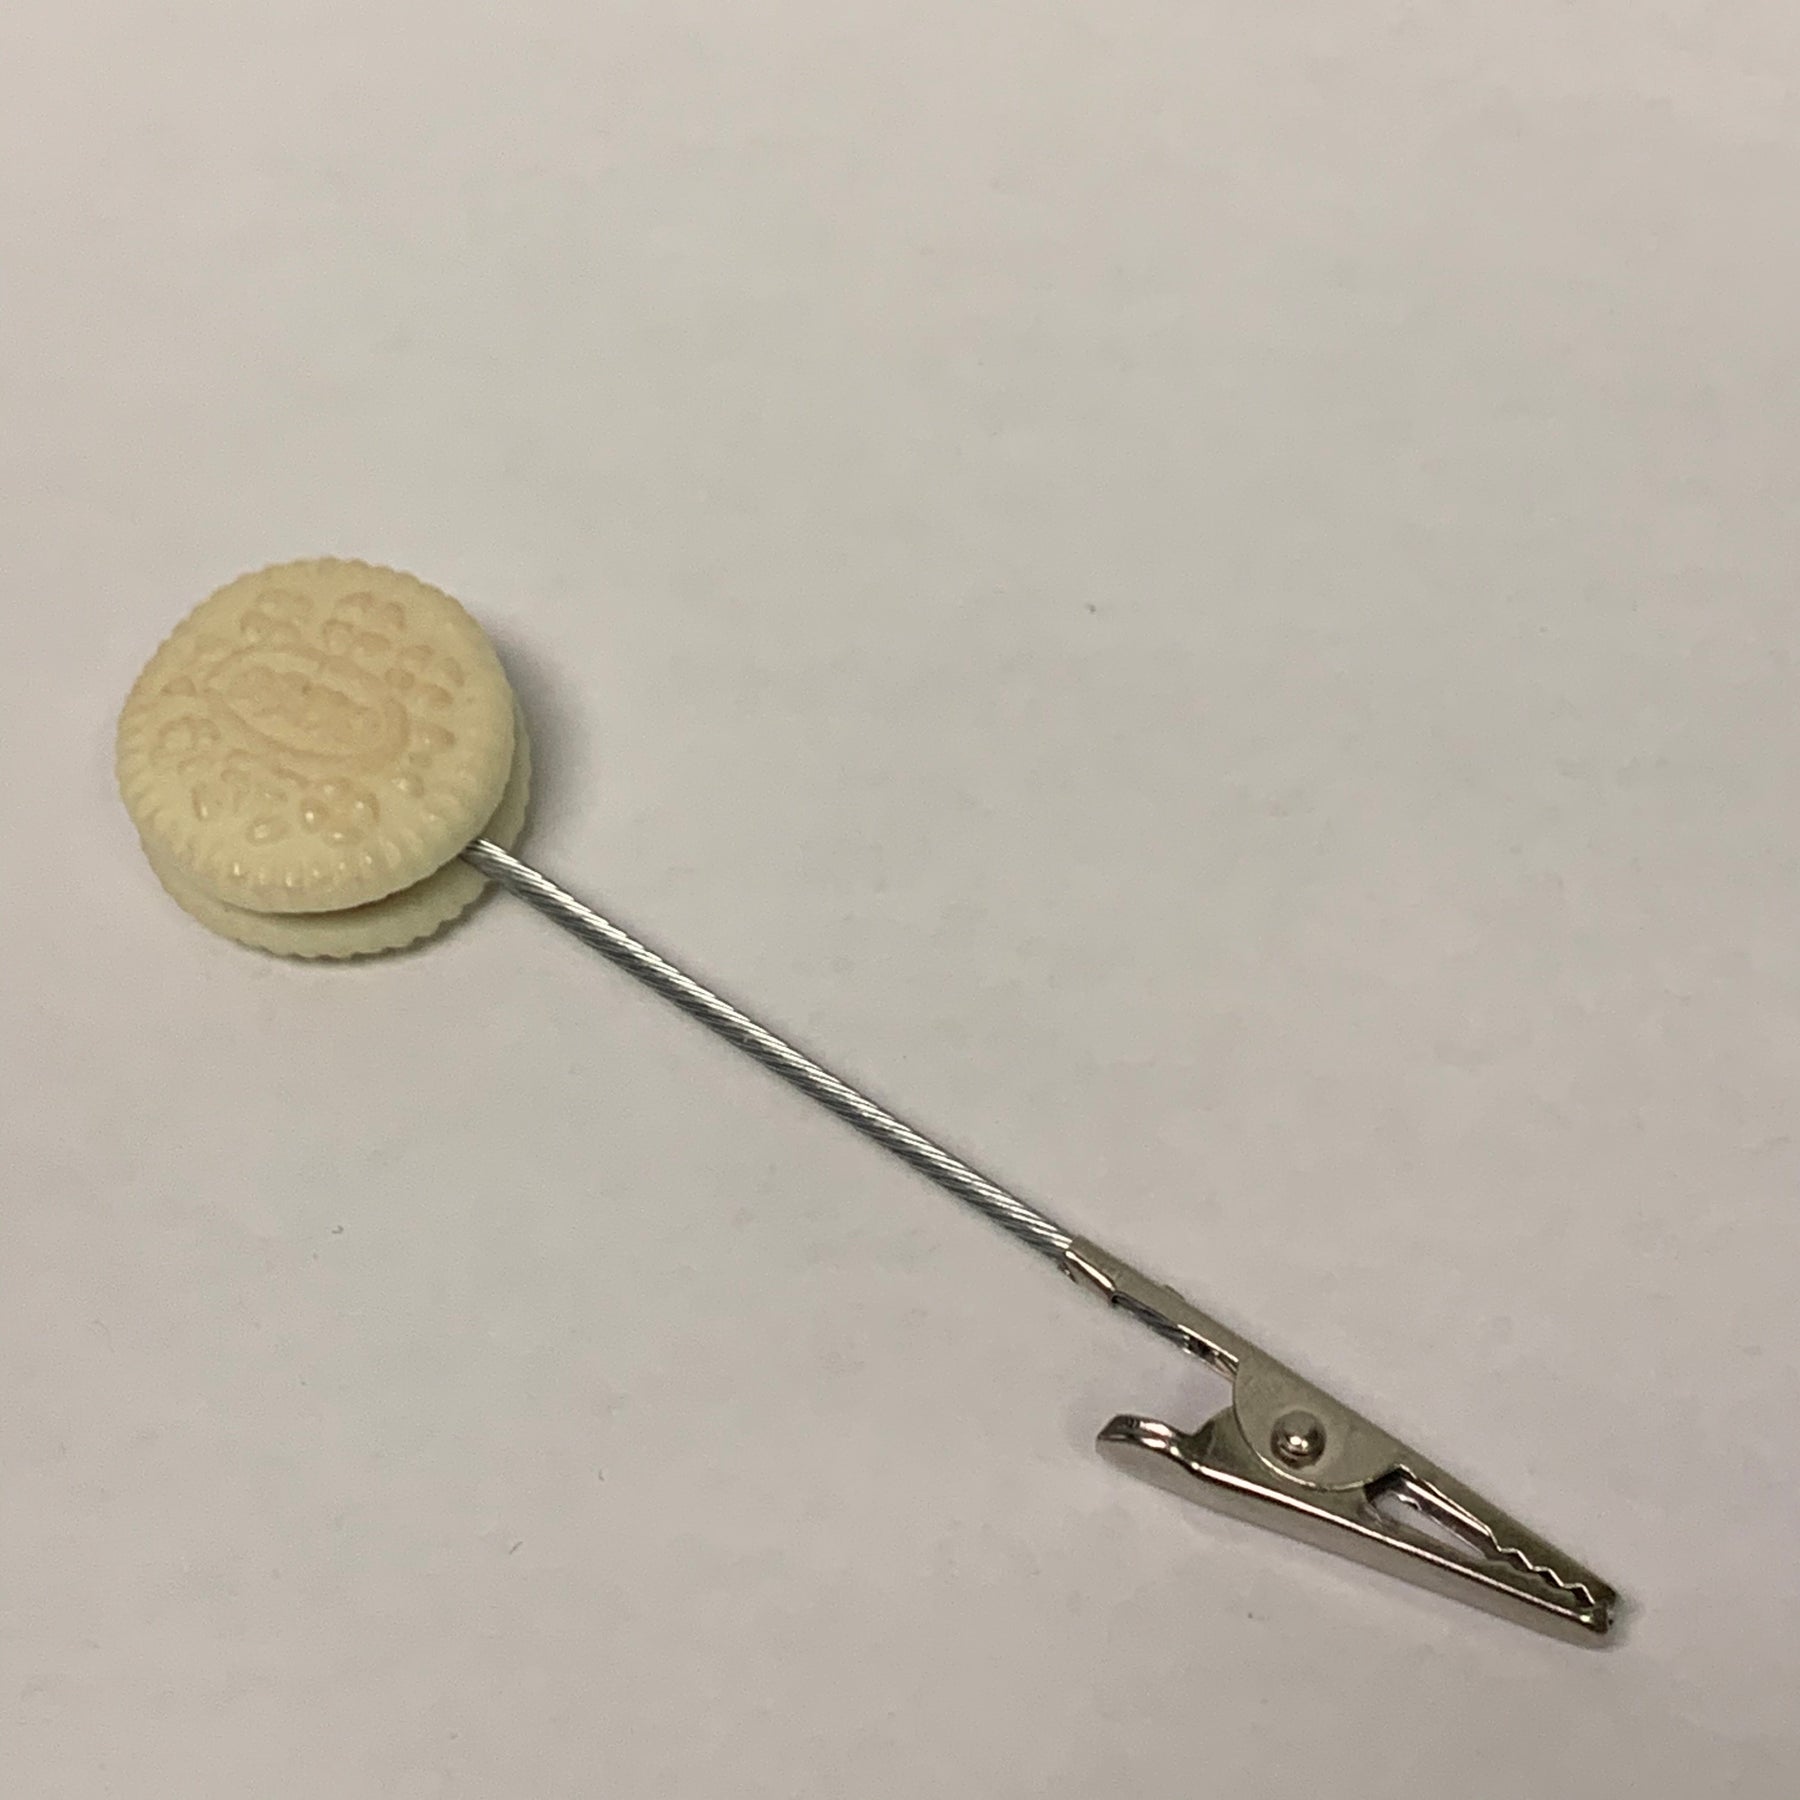 Roach Clips Locally made – Shell Shock